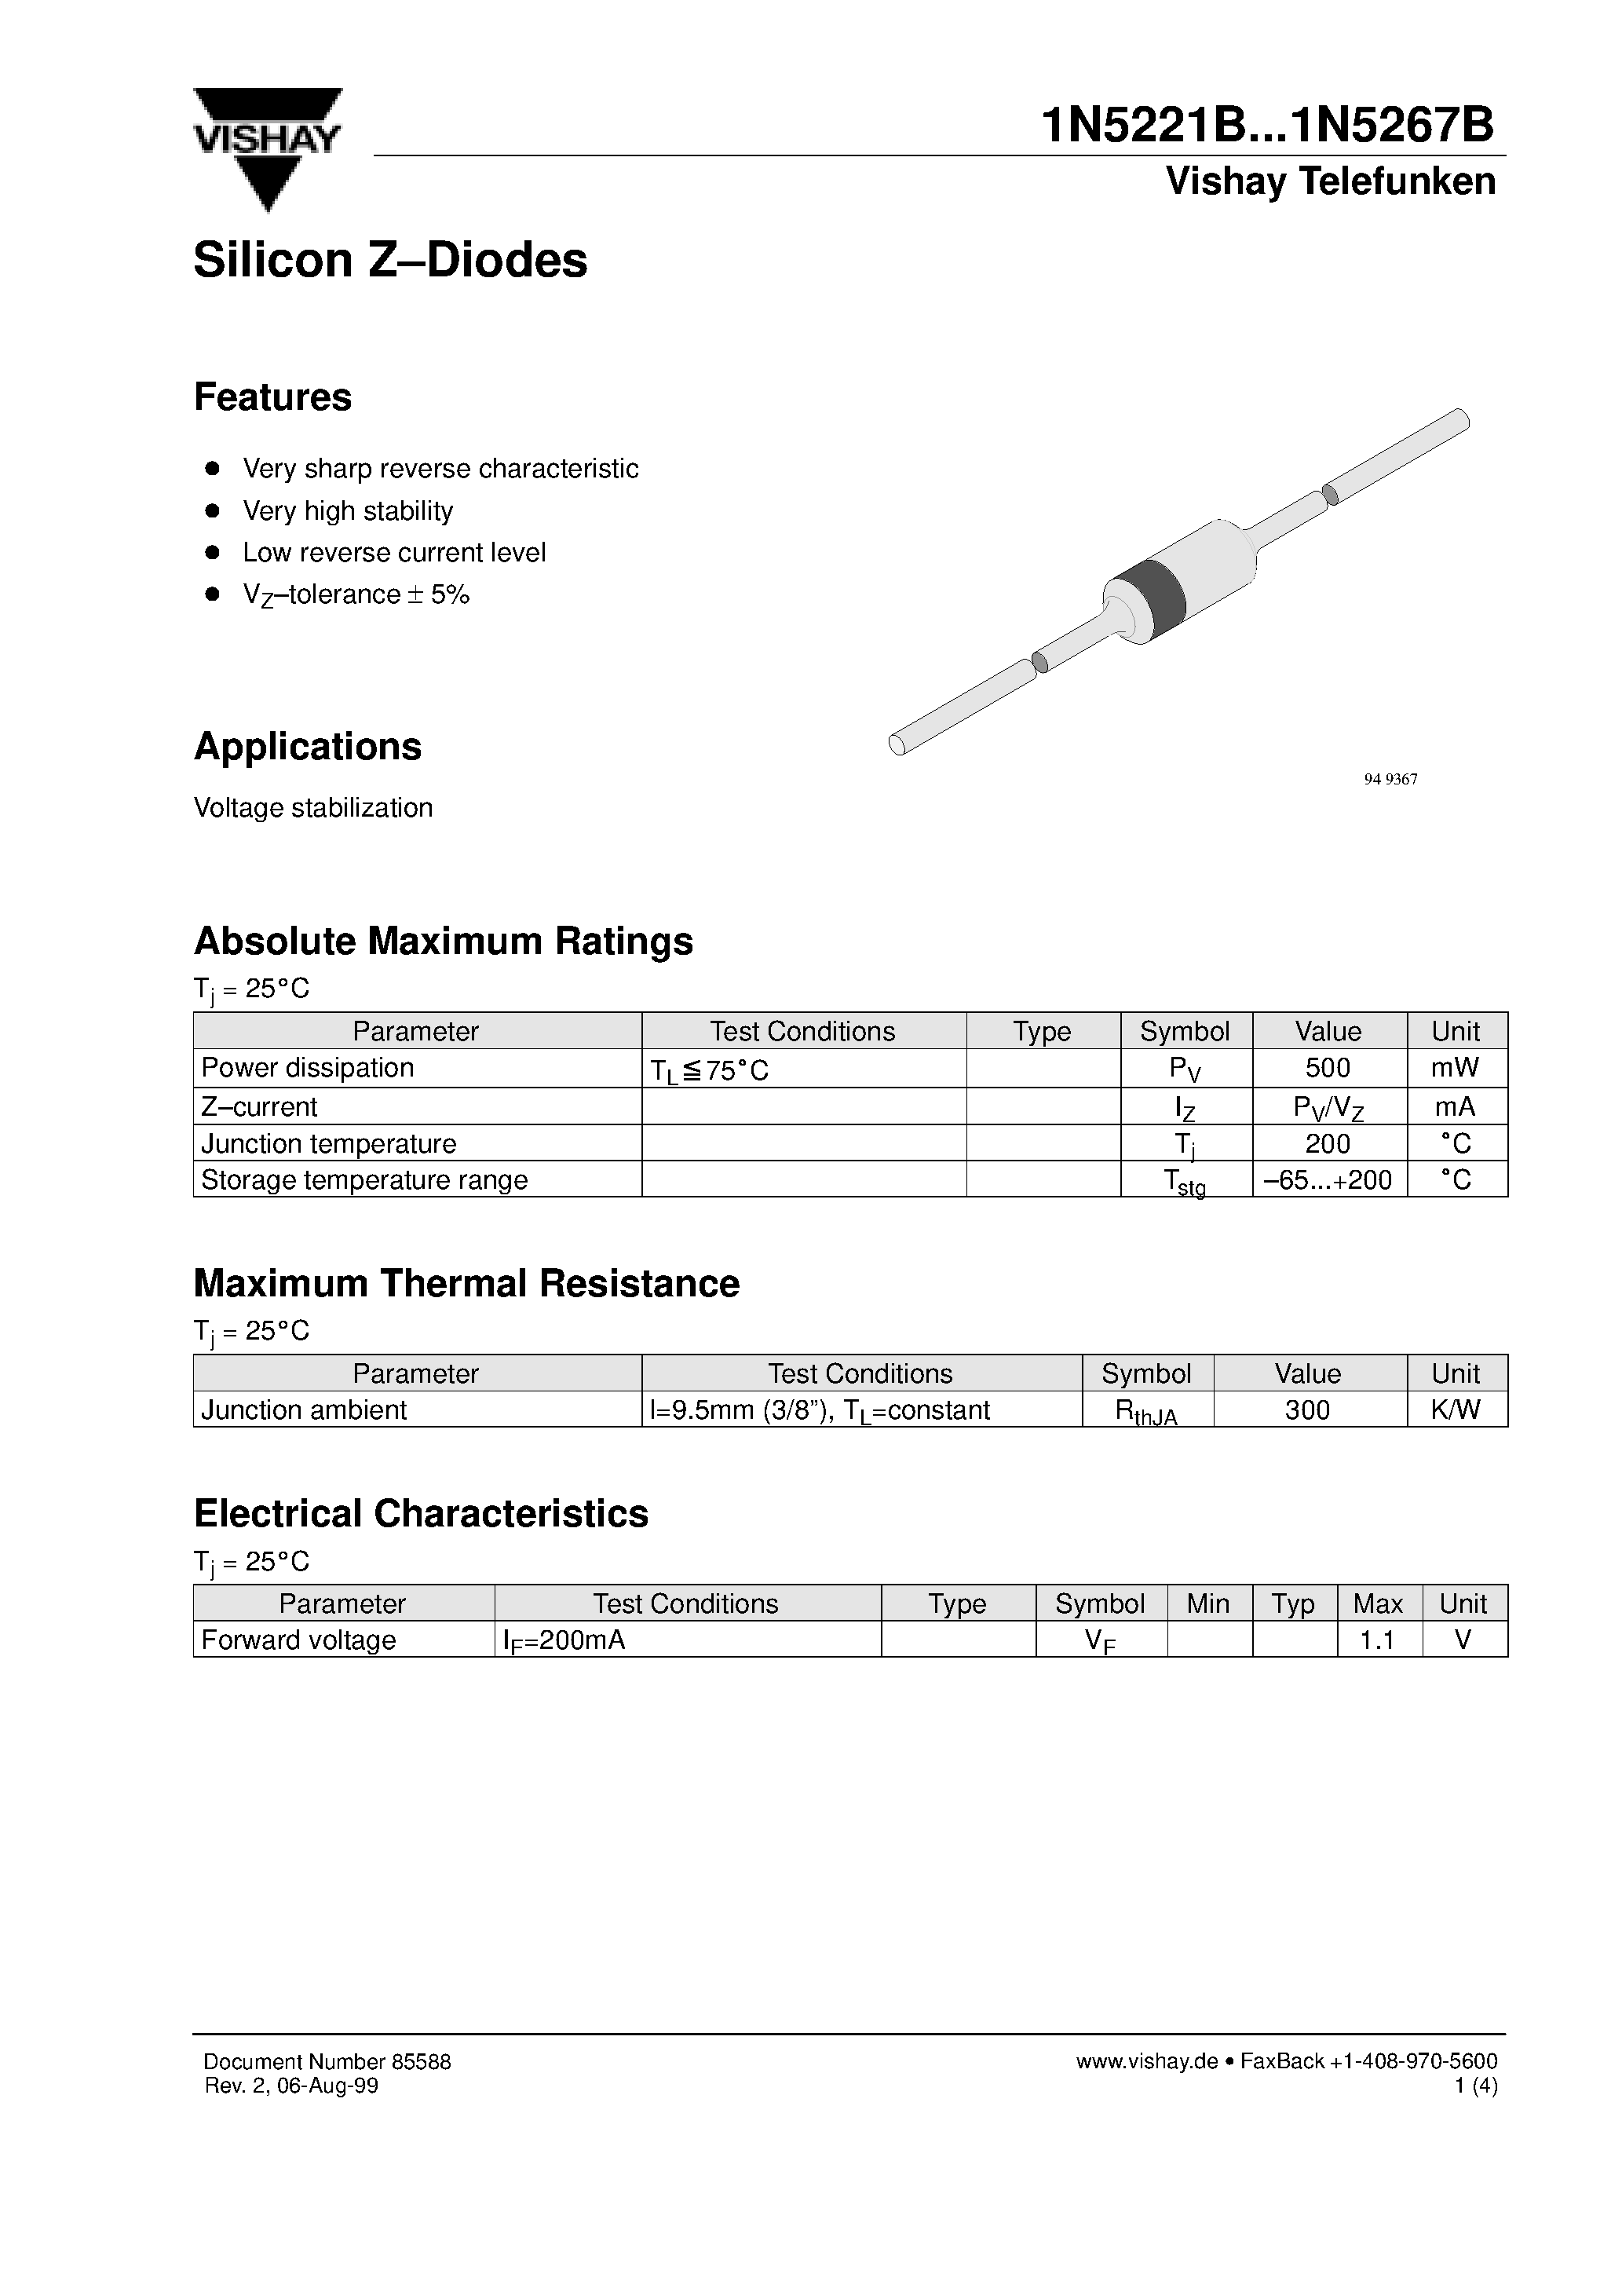 Datasheet 1N5254B - Silicon Z-Diodes page 1